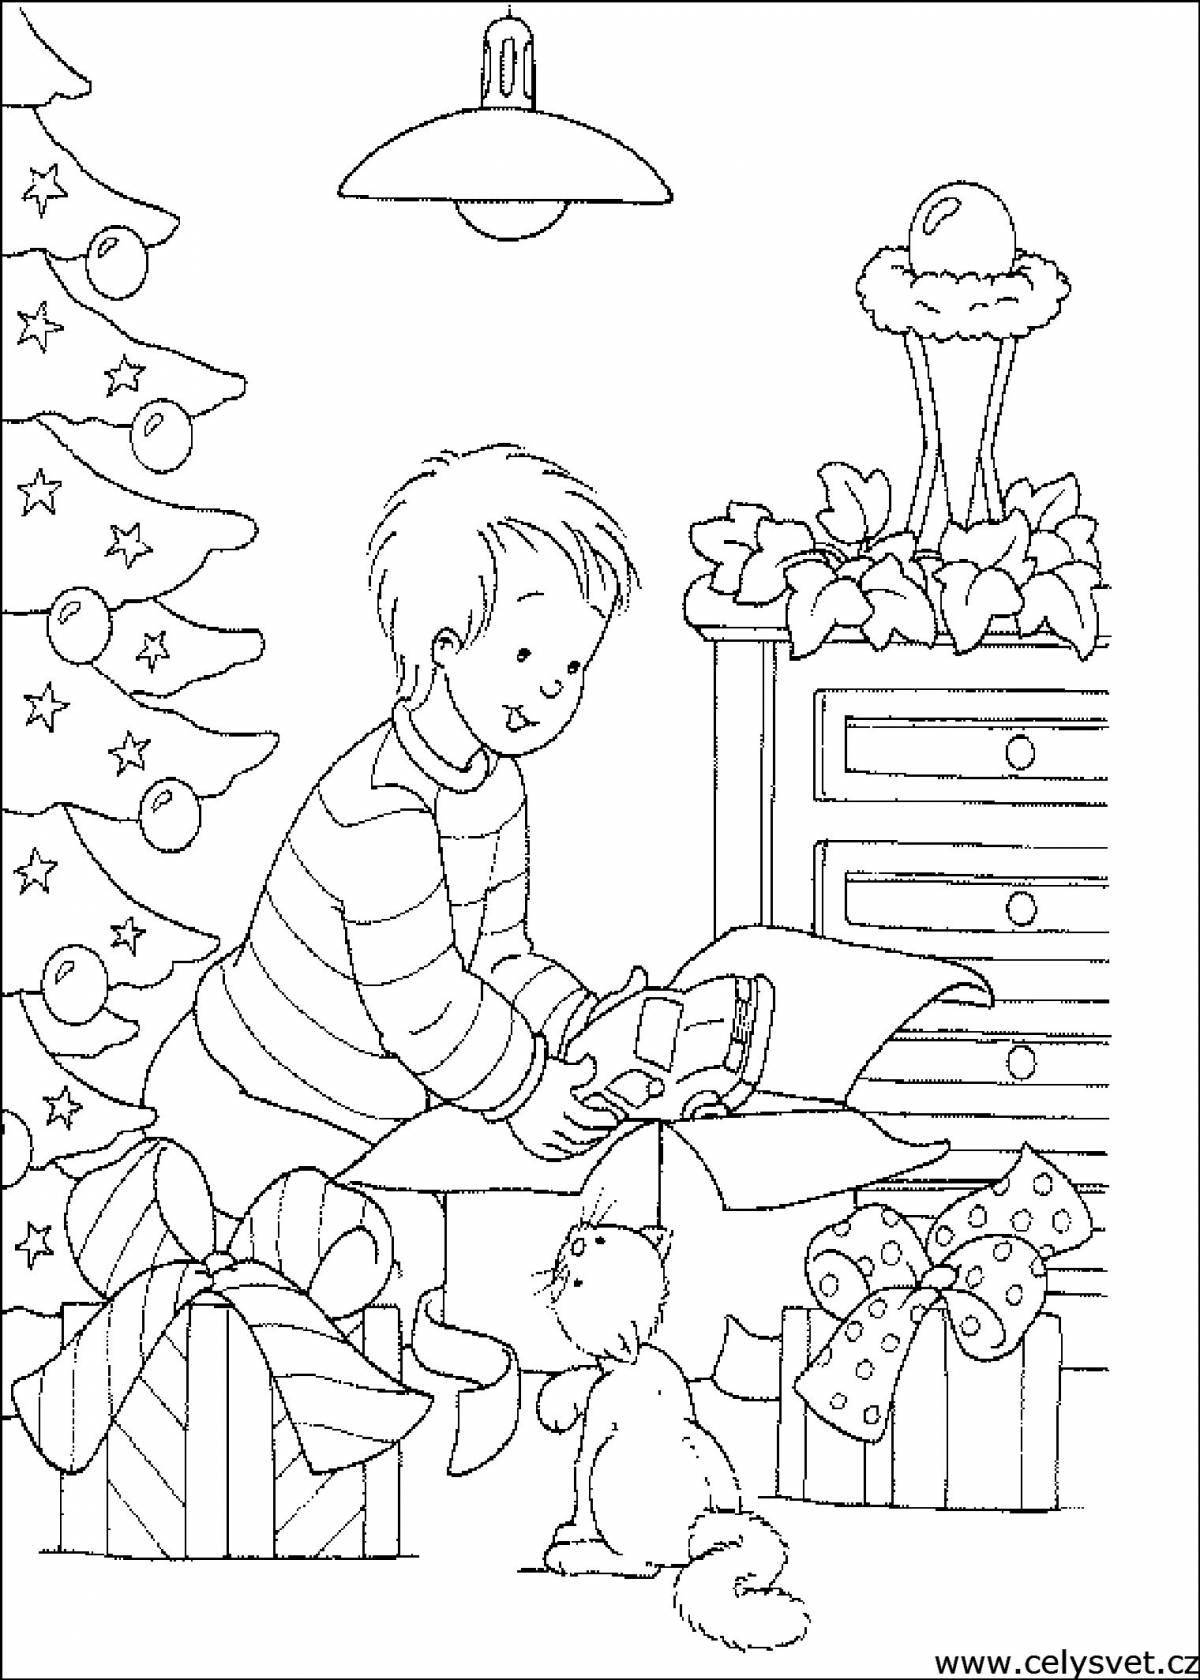 Coloring book festive Christmas story